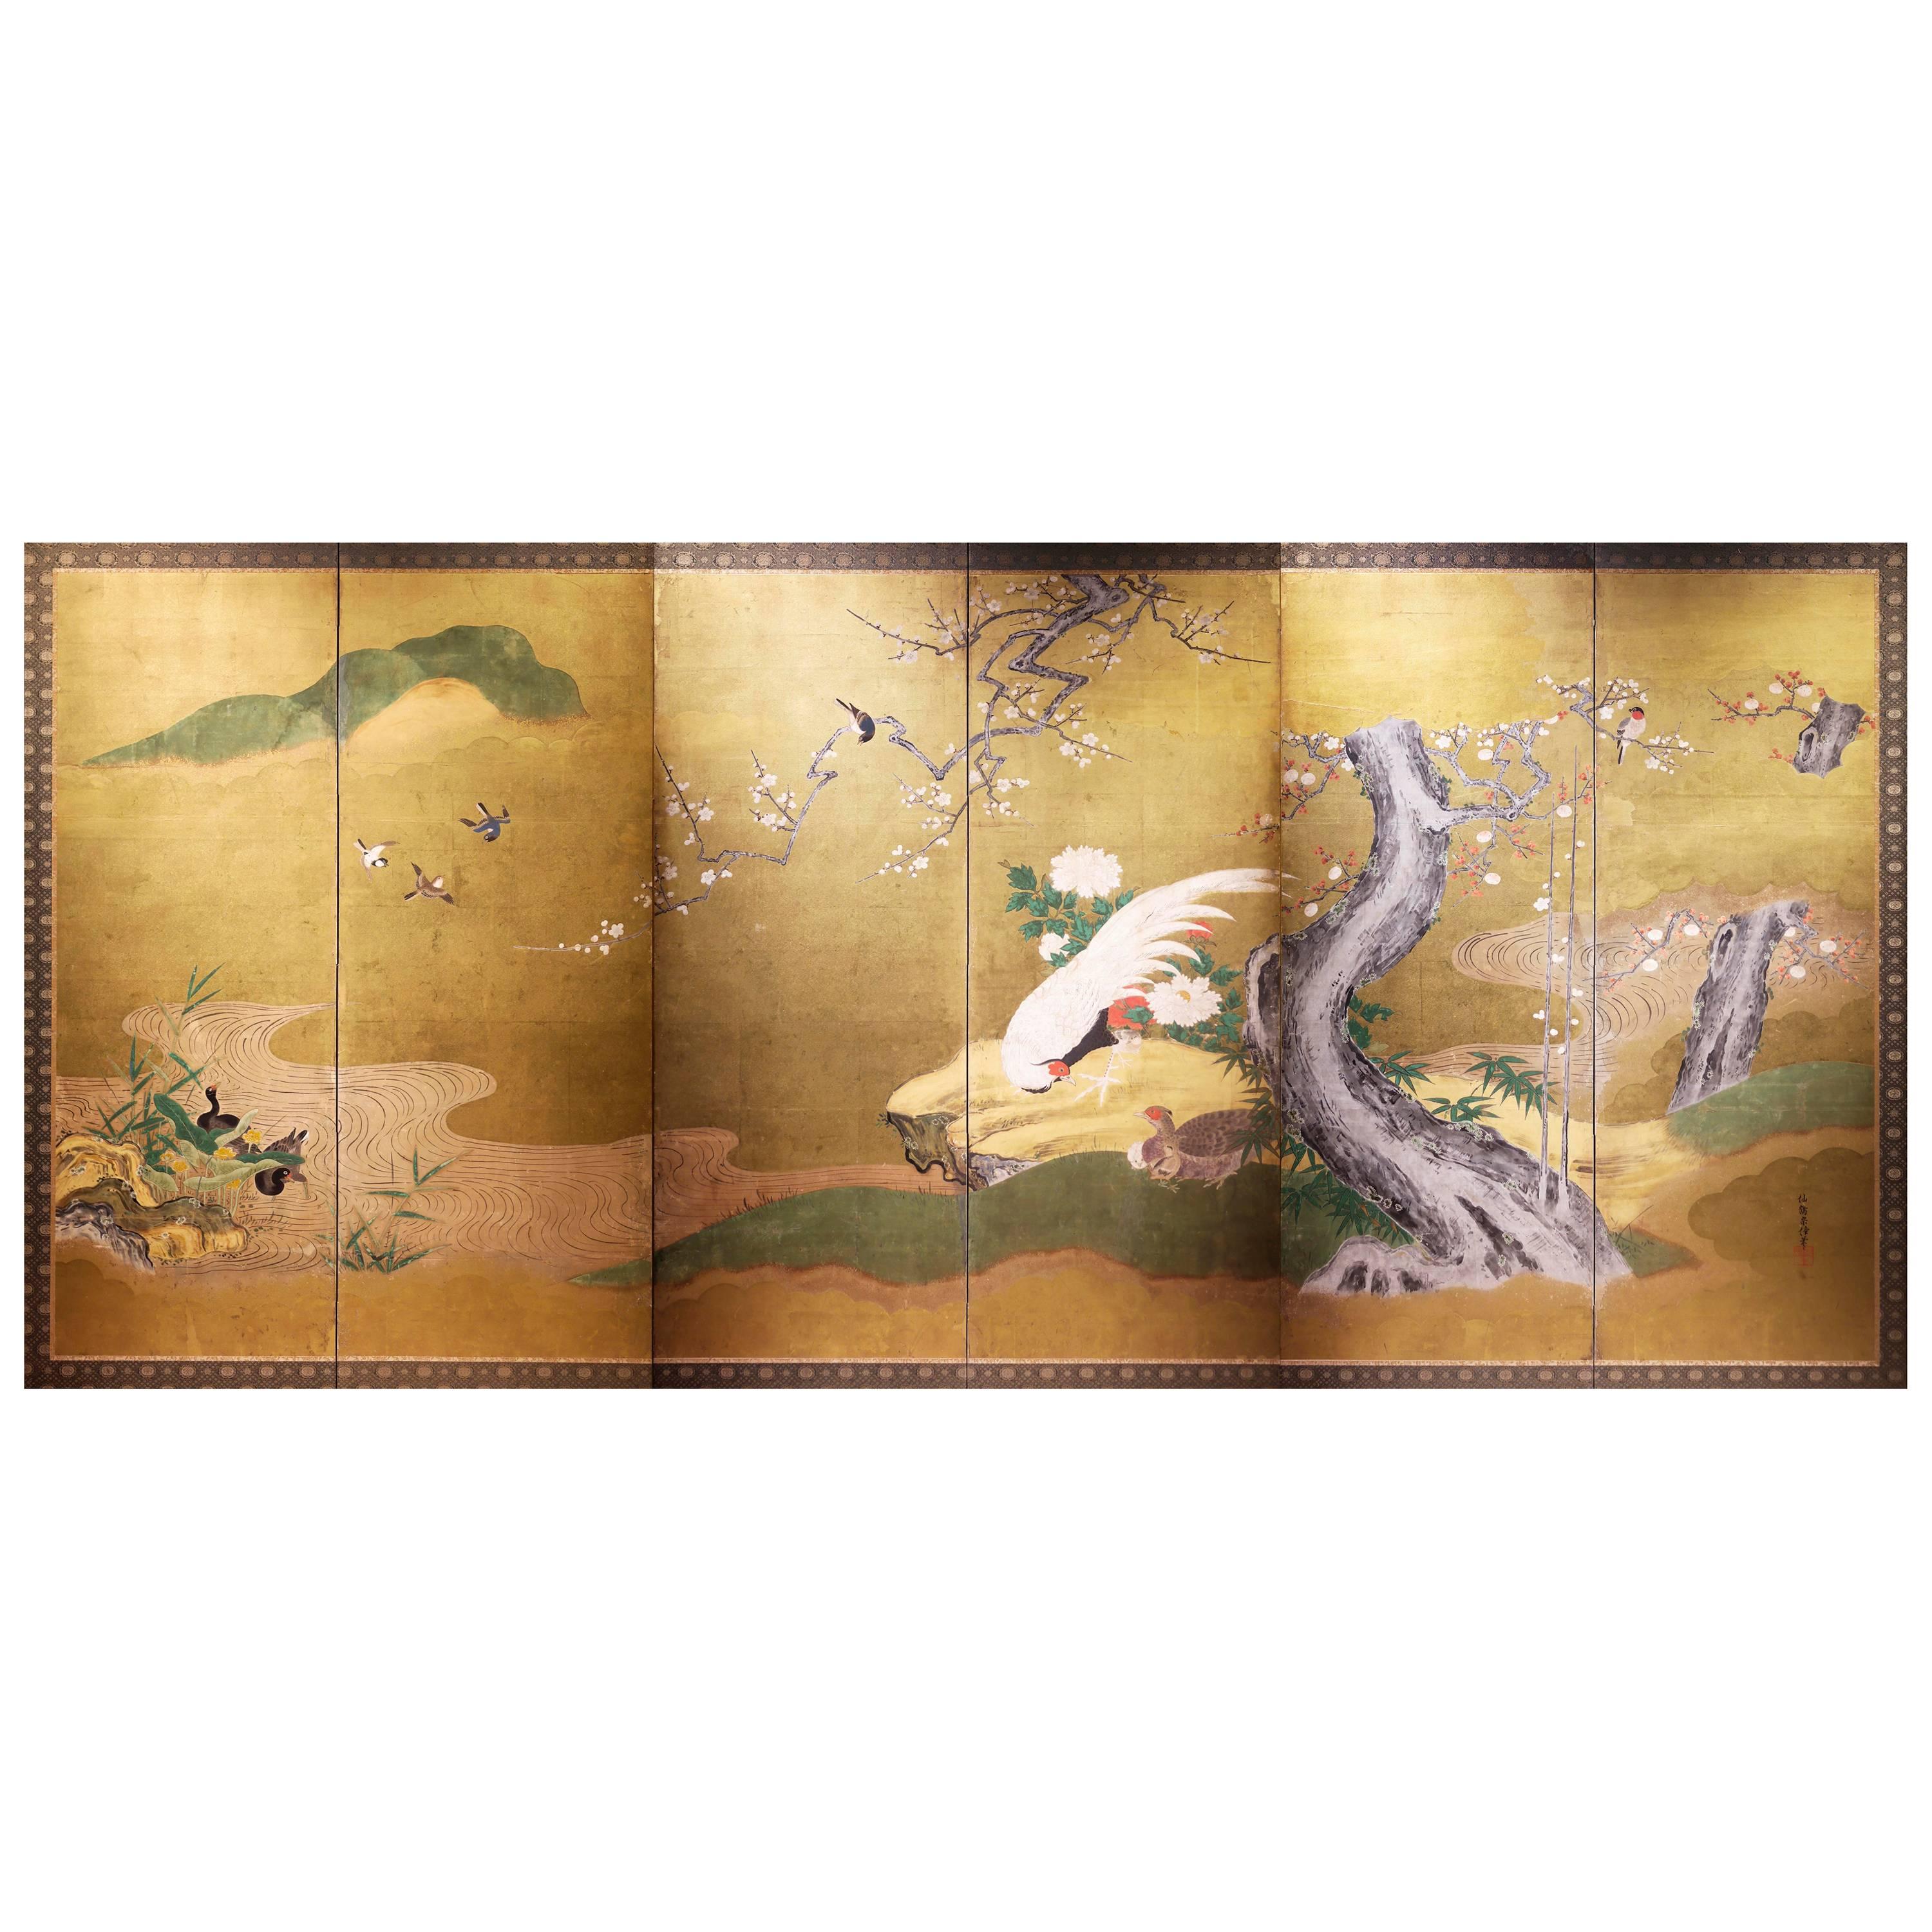 Early 19th, Japanese Folding Screen with Birds and Plum Trees, Edo period For Sale